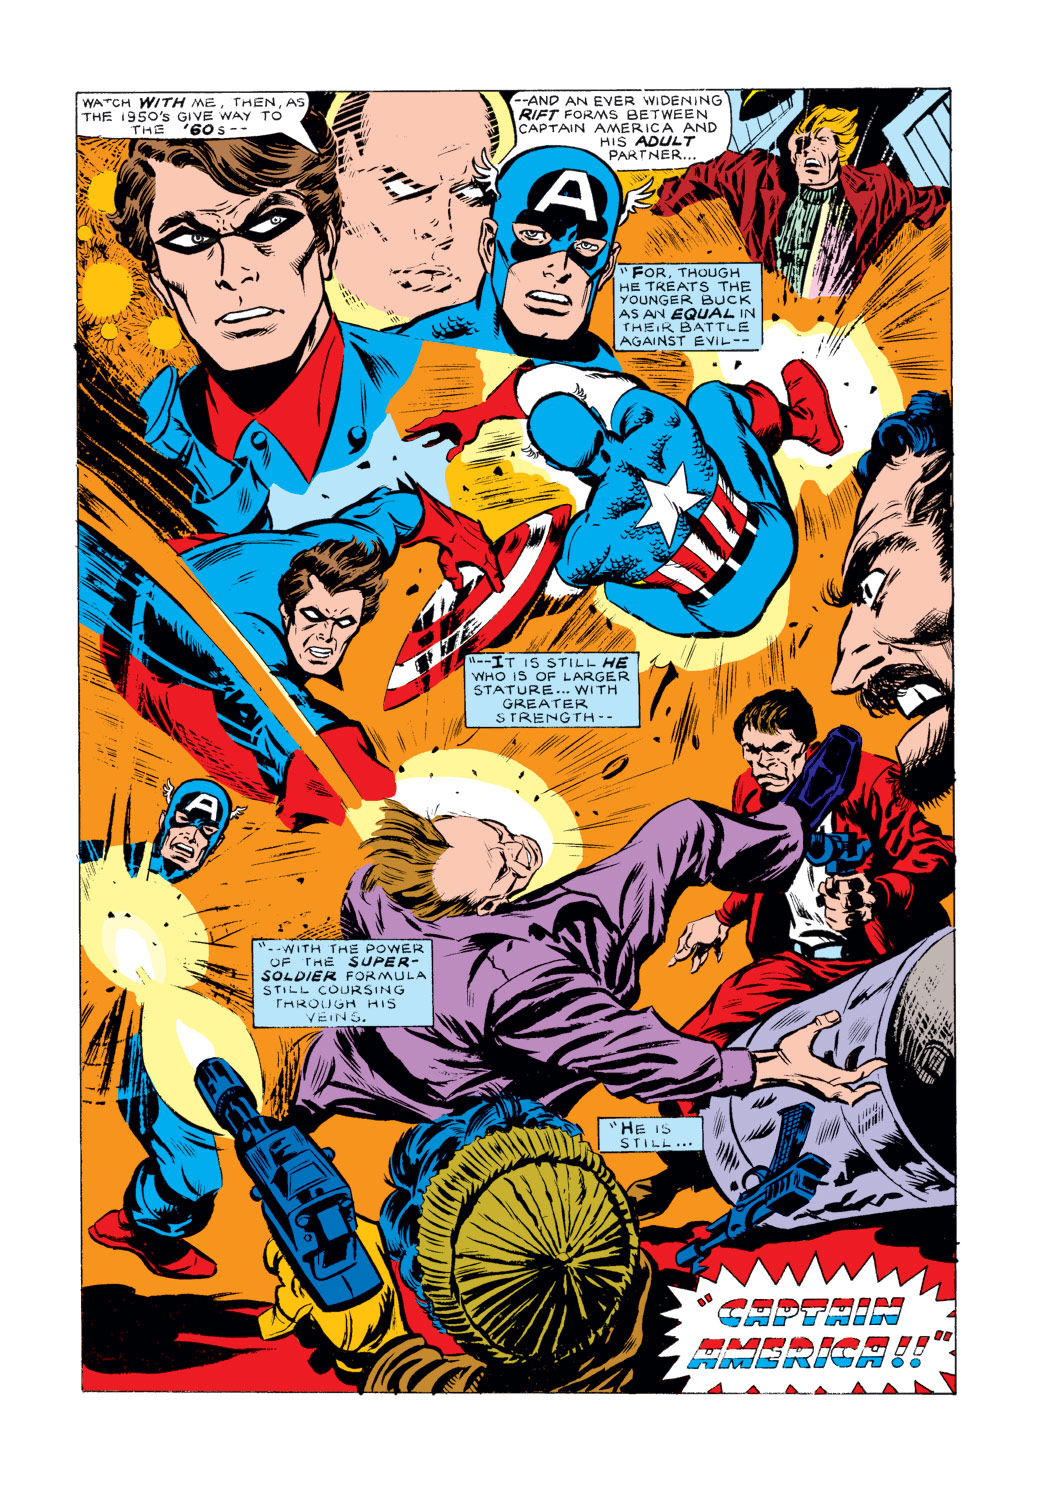 What If? (1977) issue 5 - Captain America hadn't vanished during World War Two - Page 12